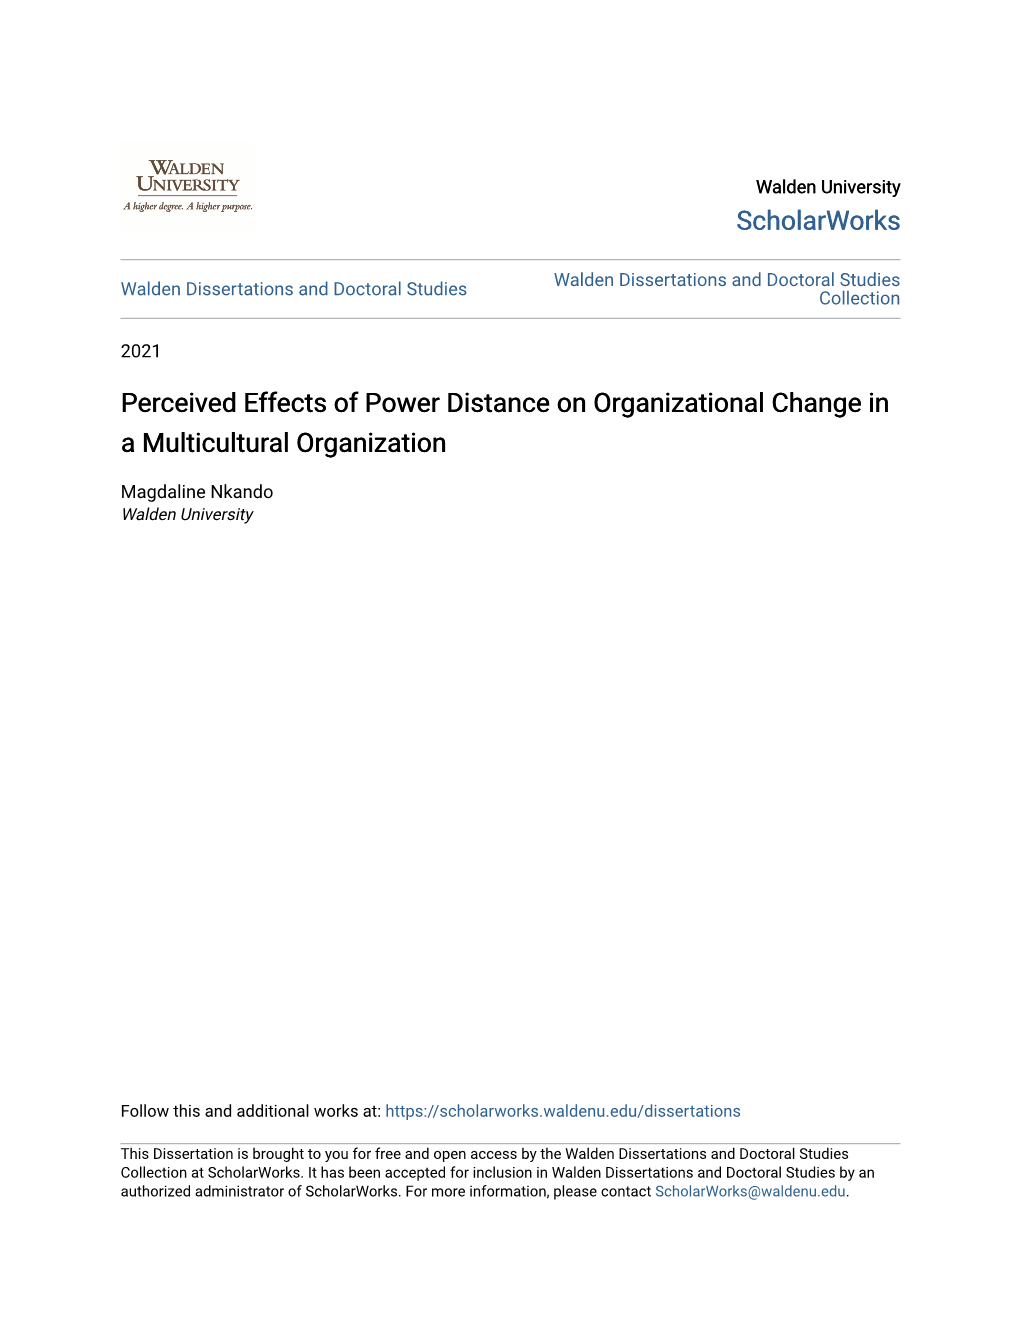 Perceived Effects of Power Distance on Organizational Change in a Multicultural Organization